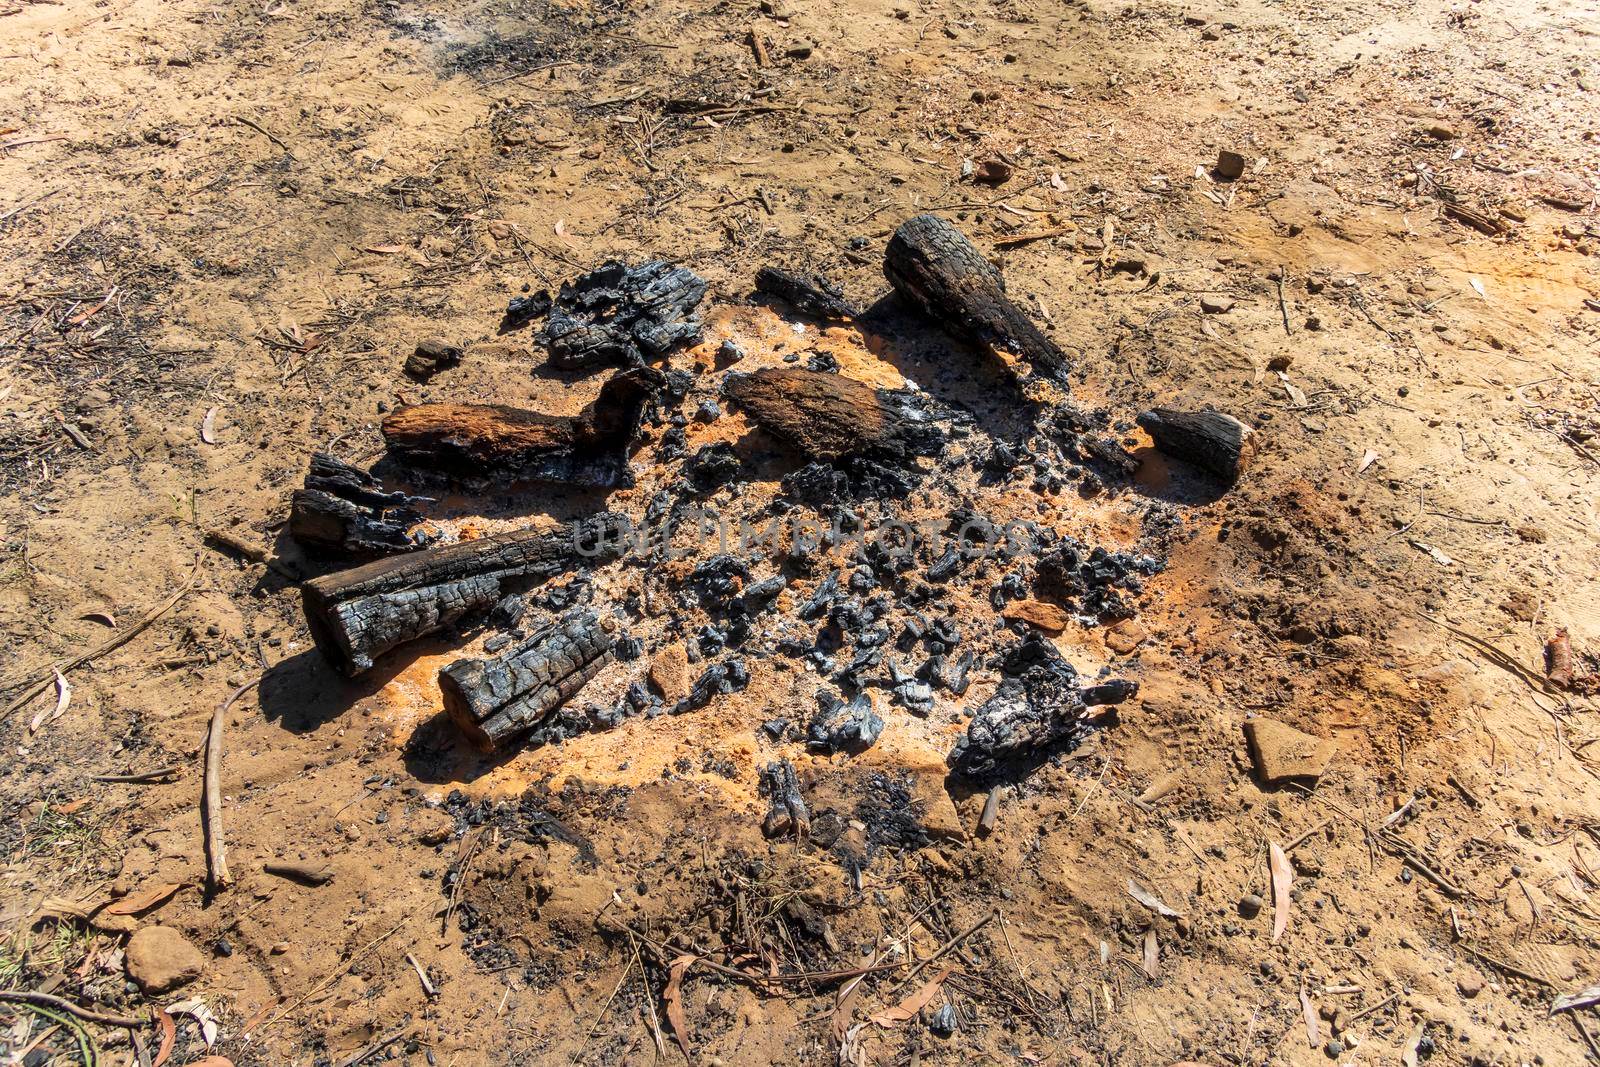 Burnt wood and coals from a recent campfire on brown dirt in The Blue Mountains in regional New South Wales in Australia